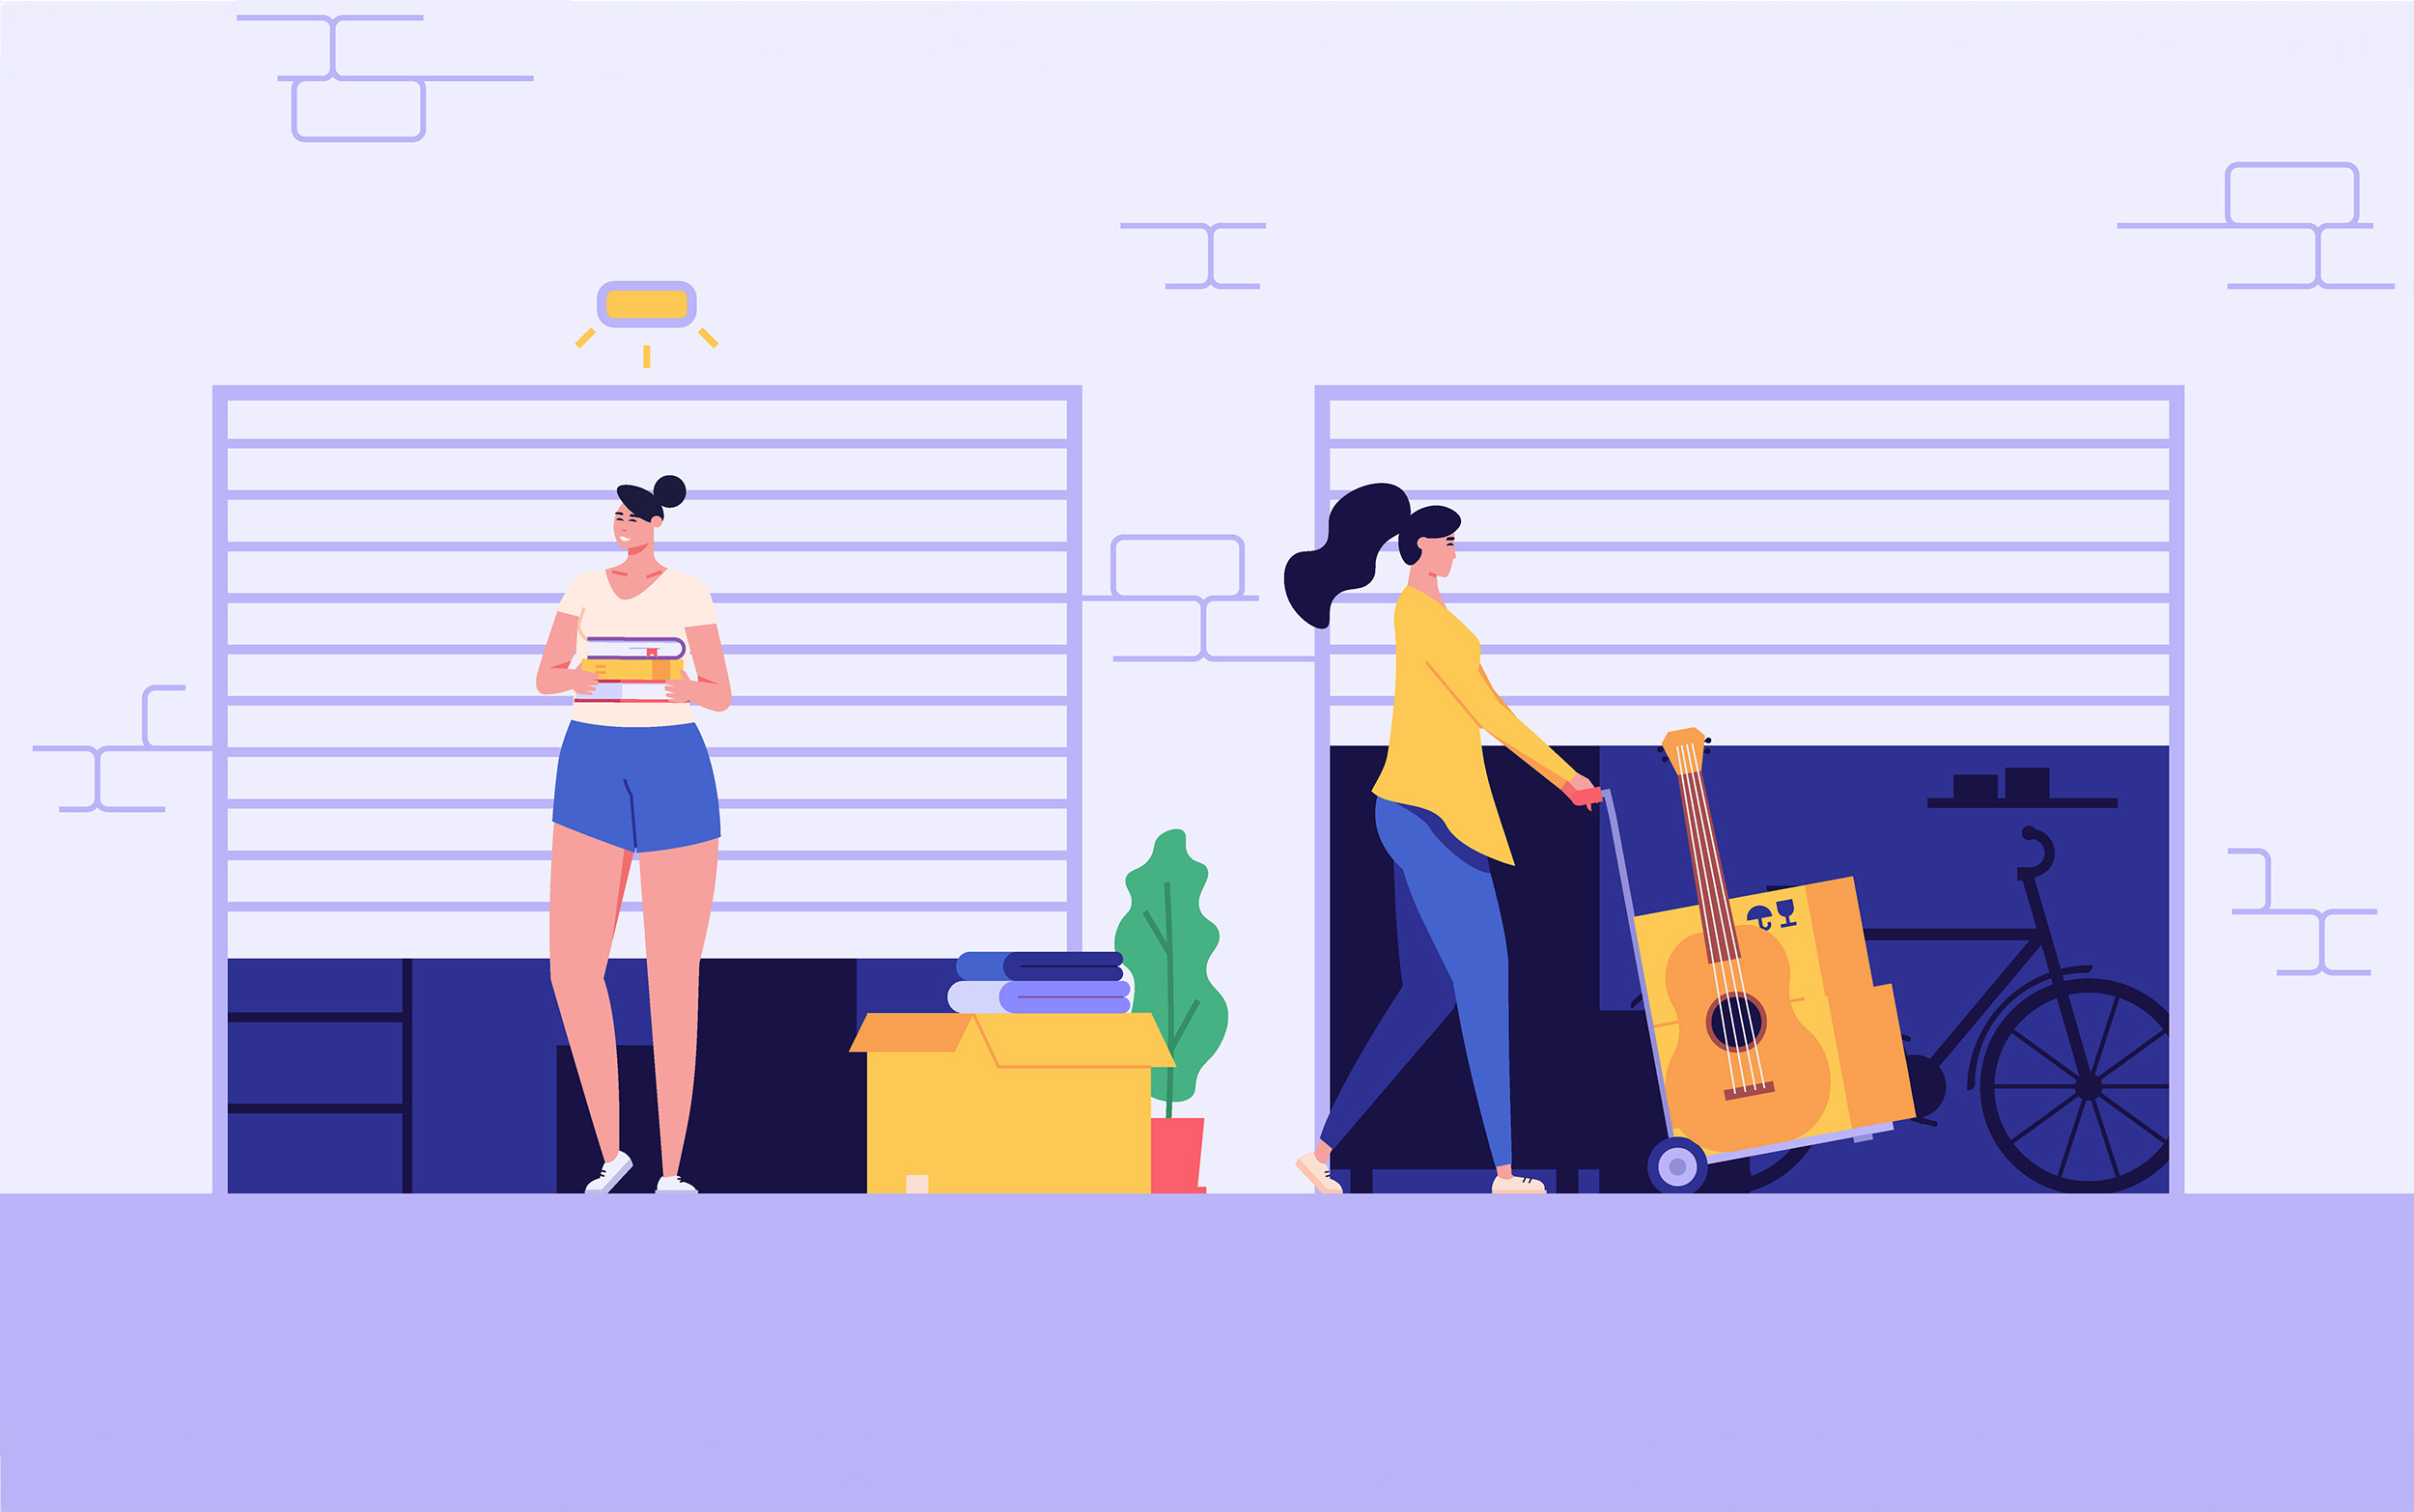 Neighbors keeping personal items in rental self-storage units. Man and women holding boxes. Concept of self storage unit, small mini warehouse, rental garage. Vector illustration in flat design